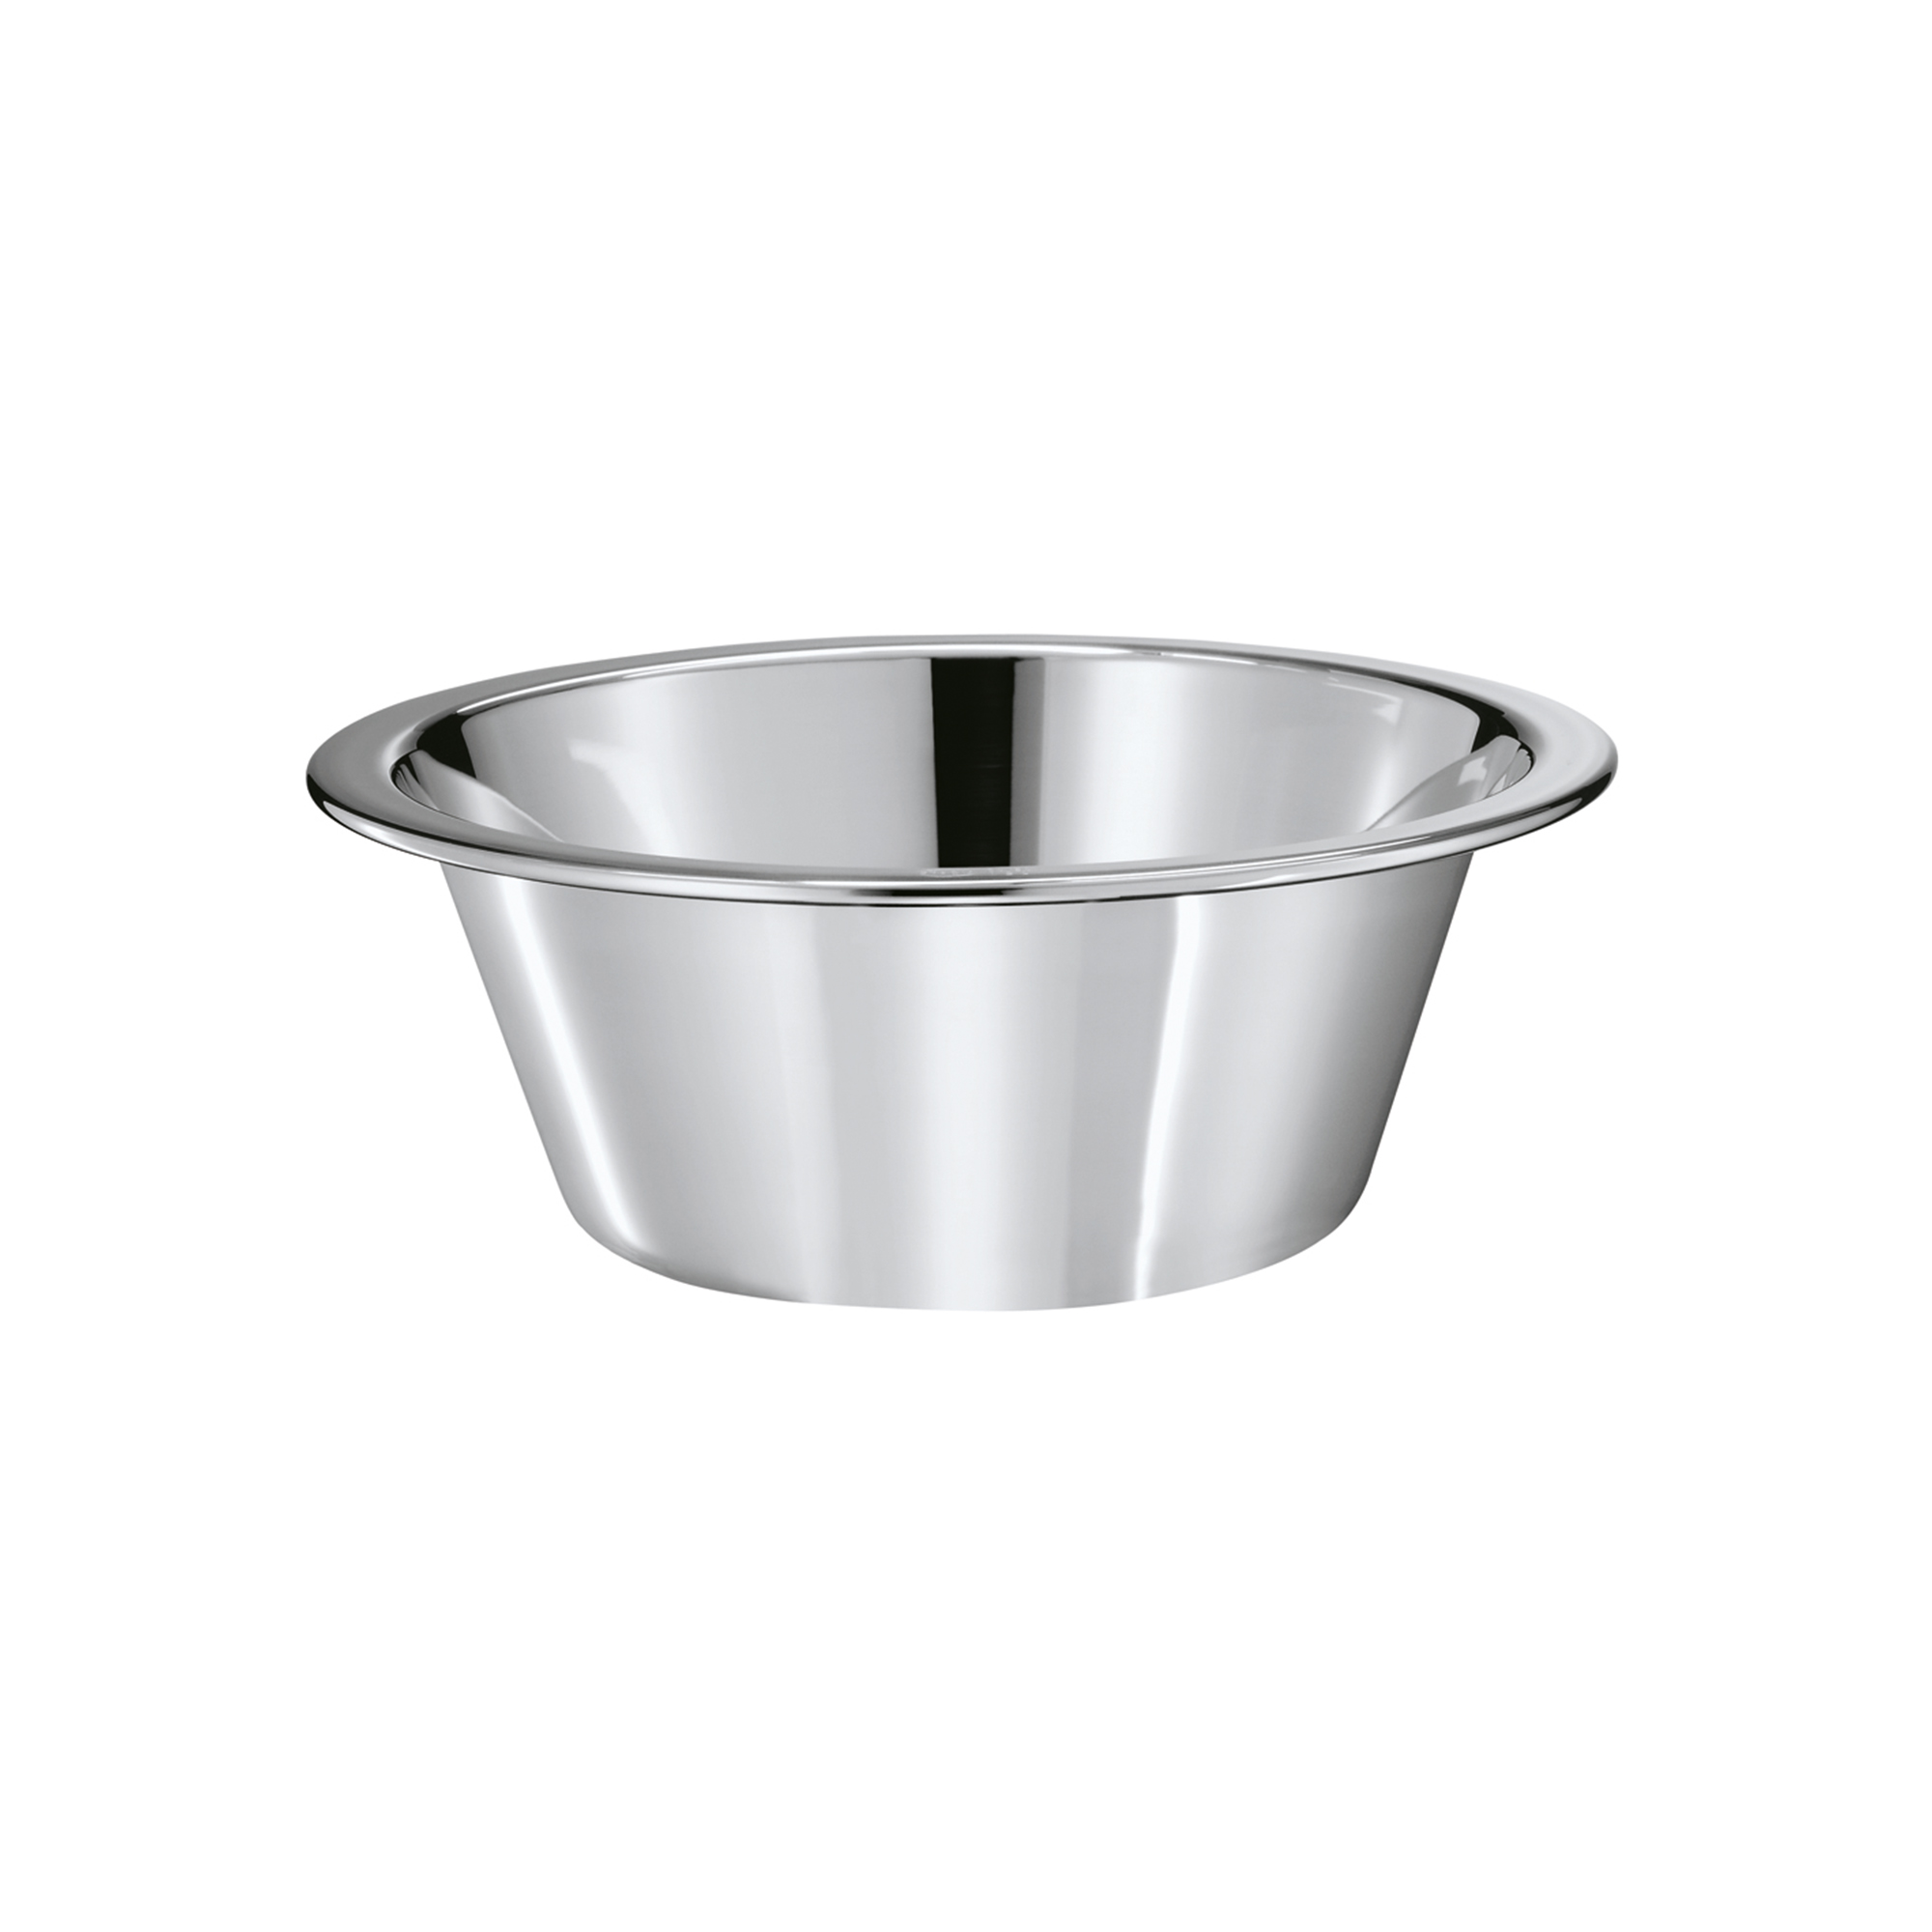 Conical Bowl Ø 27 cm|10.6 in.